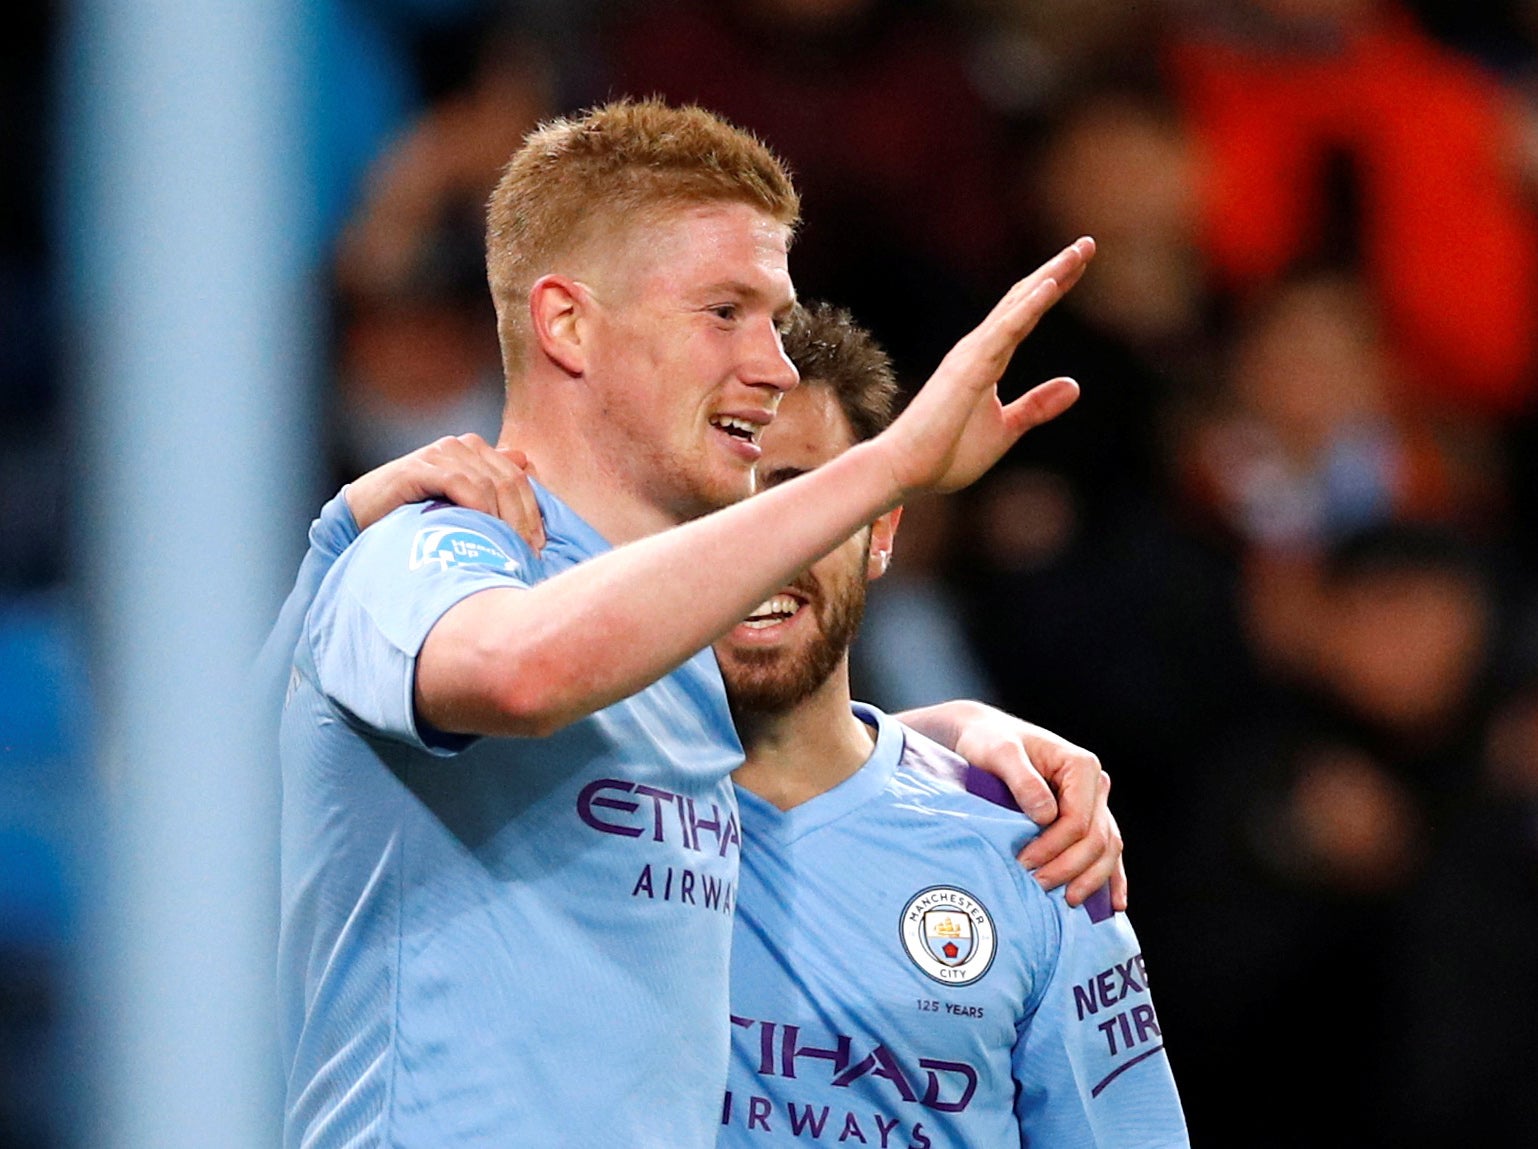 De Bruyne made sure of the win